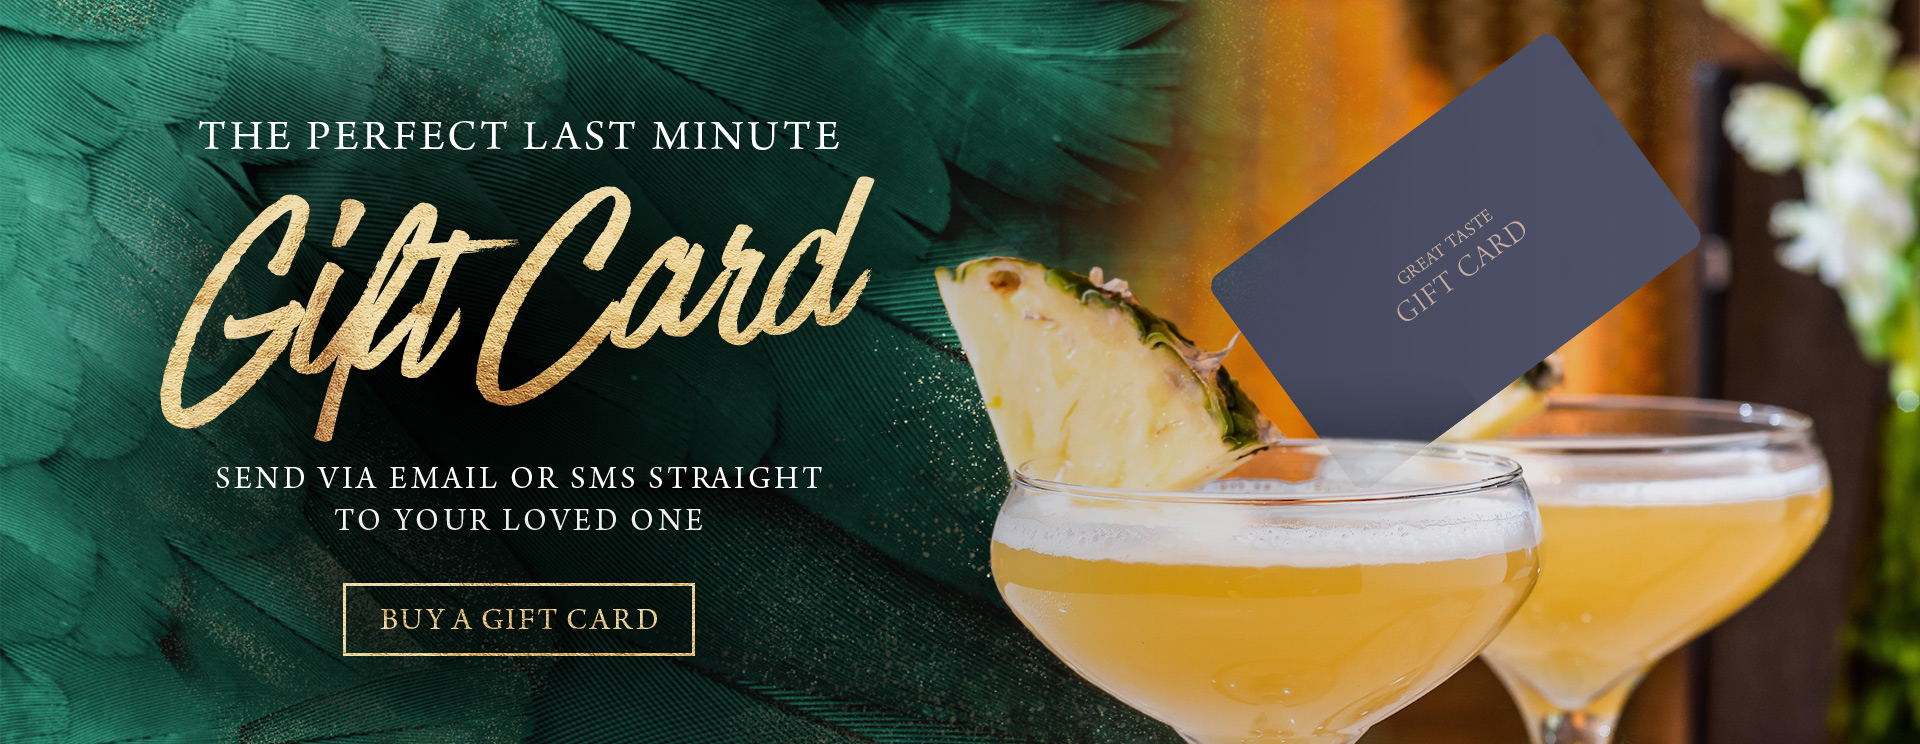 Give the gift of a gift card at The Marchmont Arms